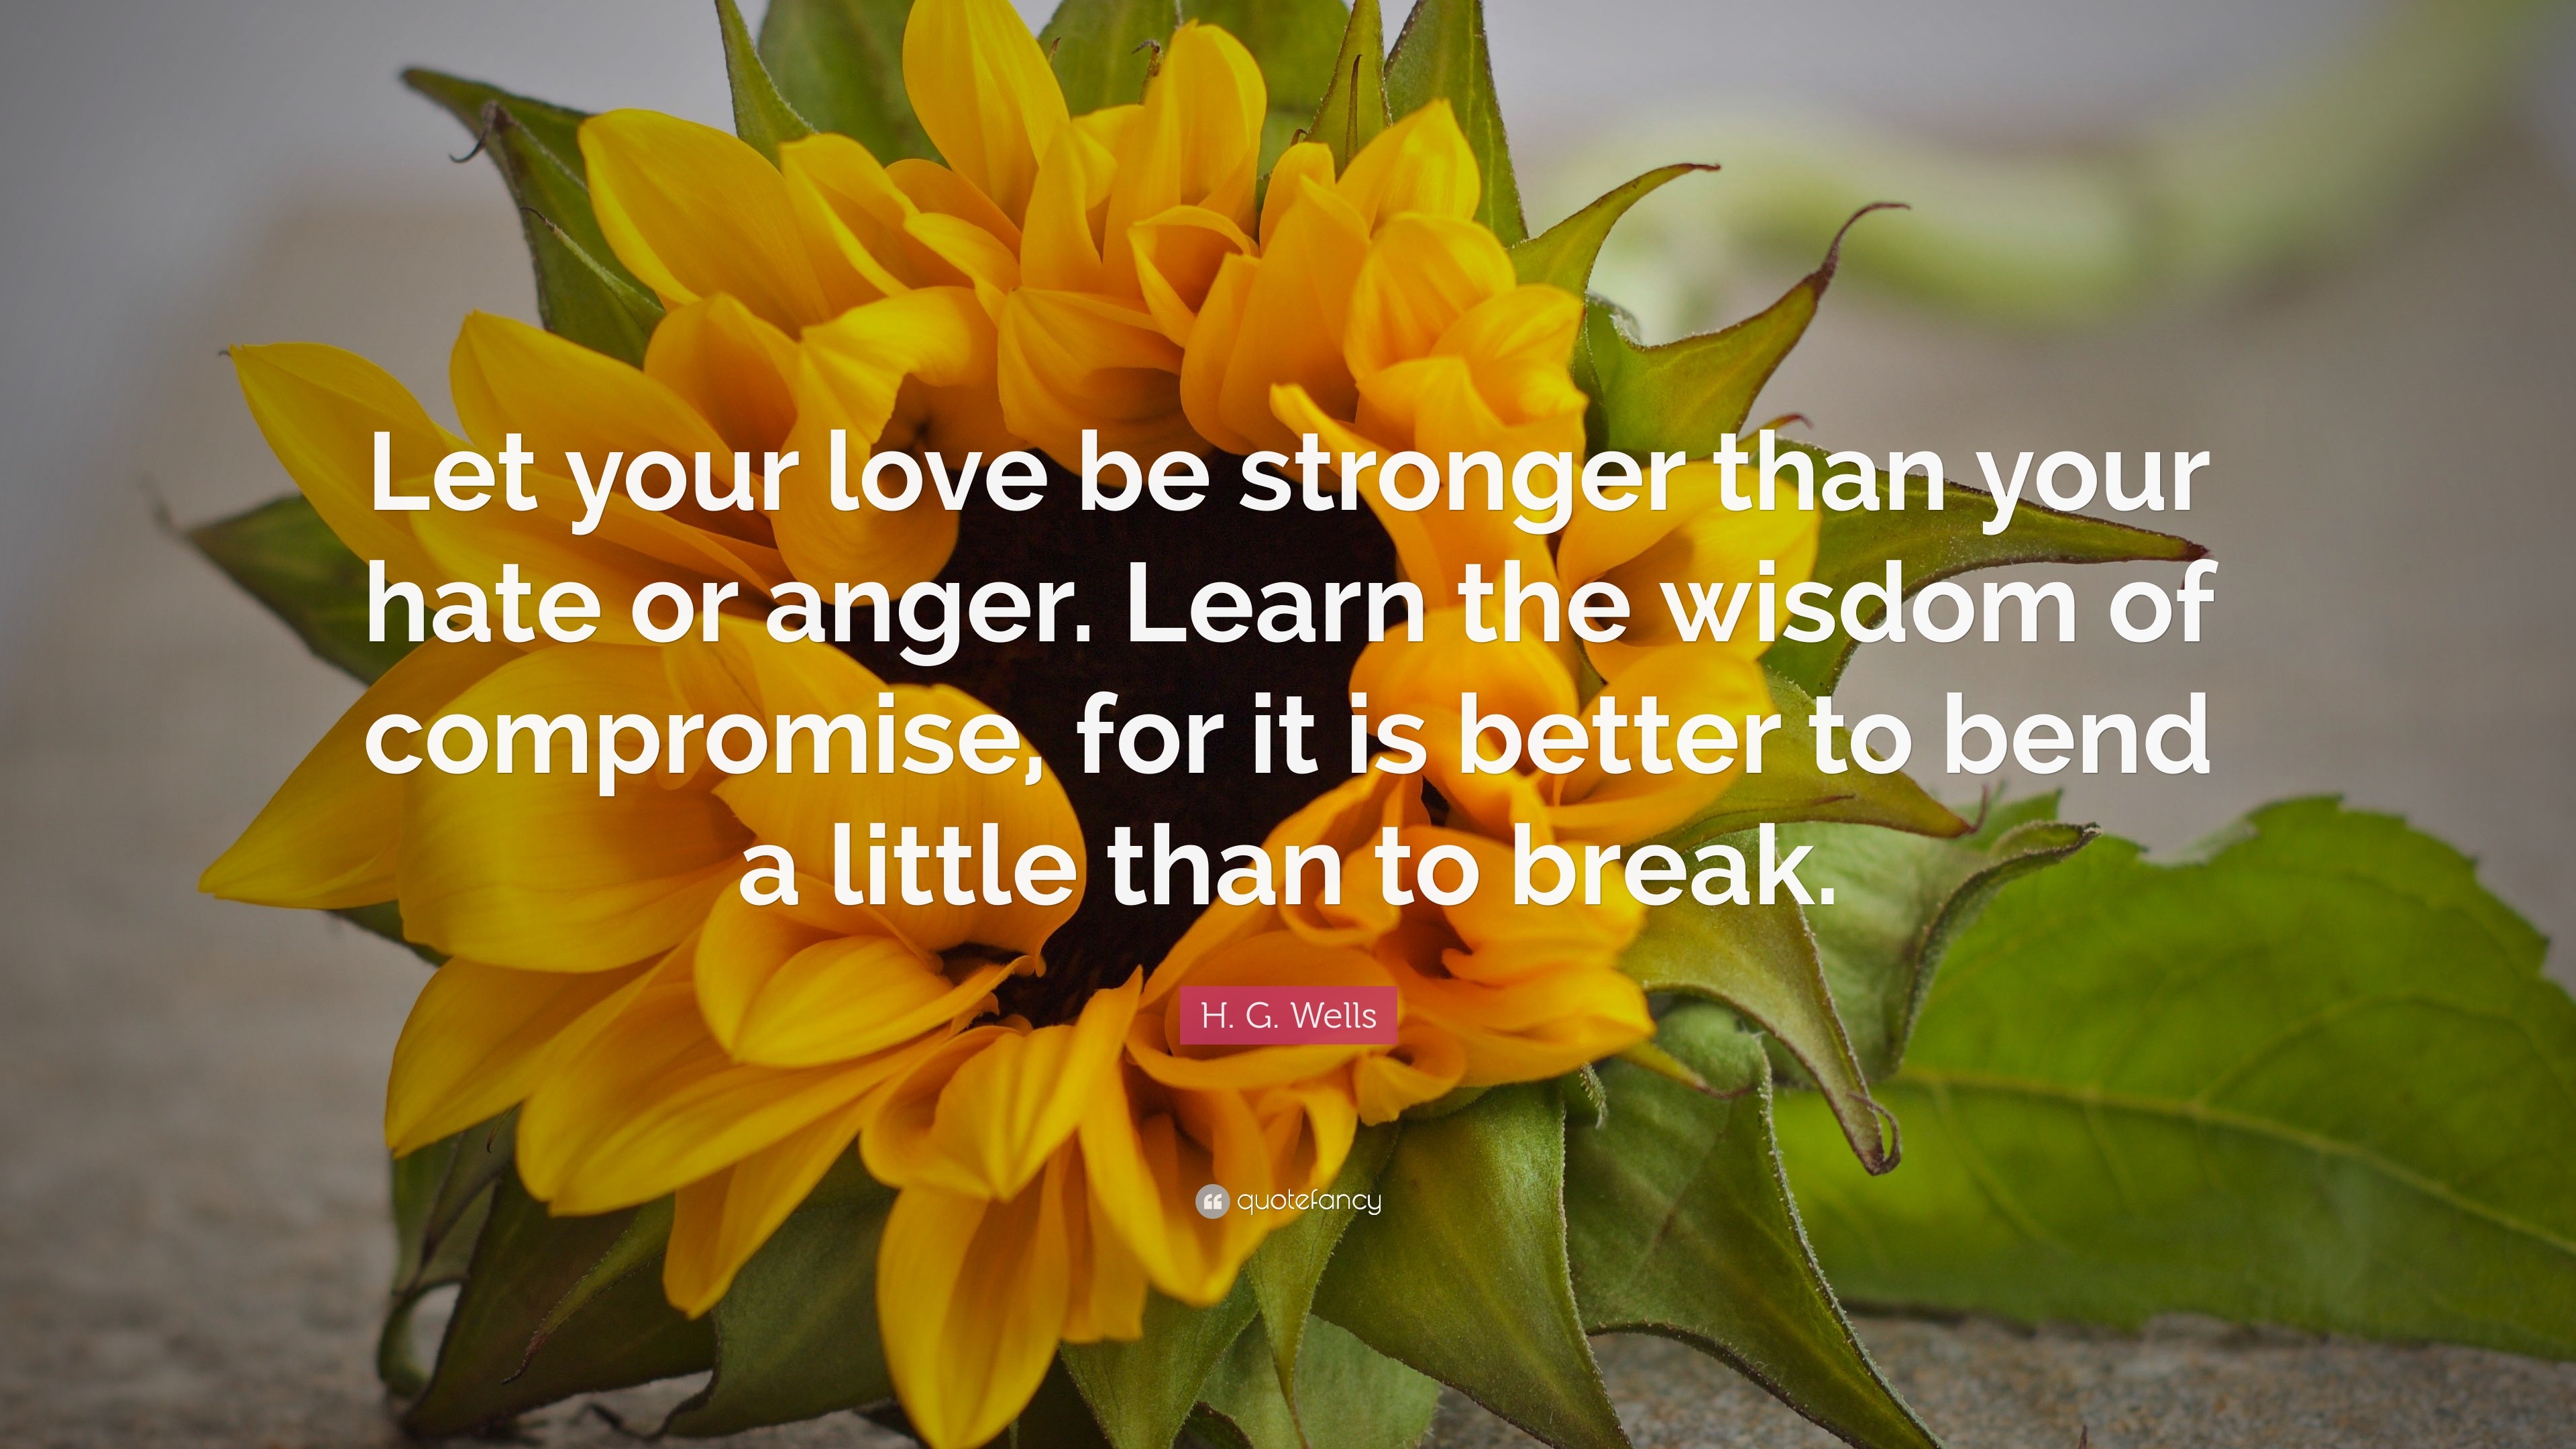 H G Wells Quote “Let your love be stronger than your hate or anger